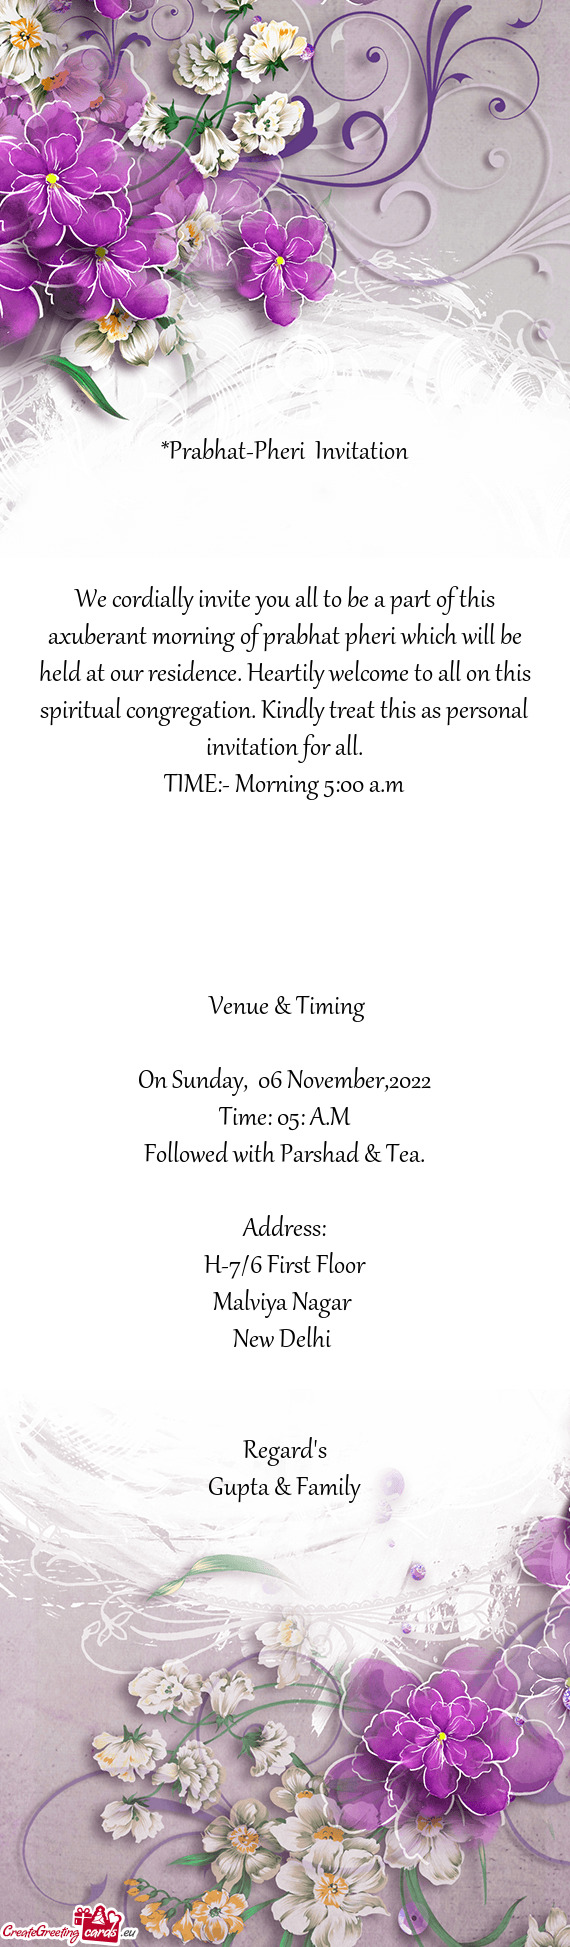 We cordially invite you all to be a part of this axuberant morning of prabhat pheri which will be he